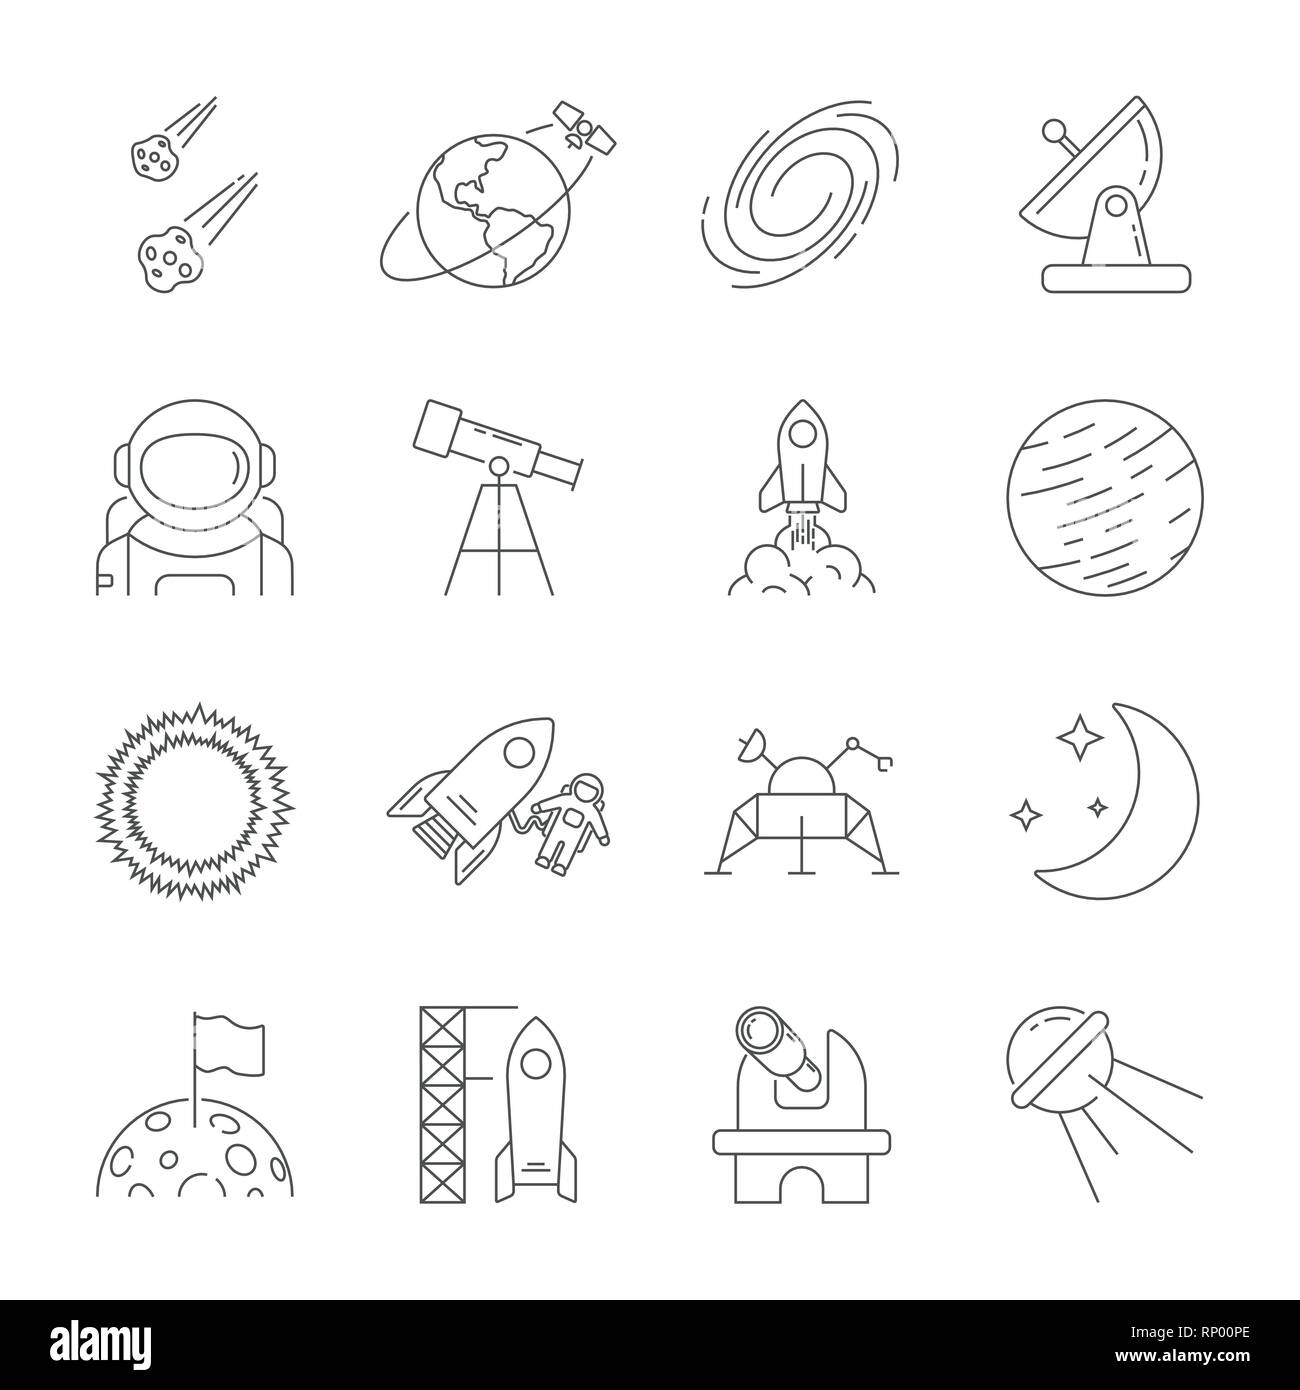 Space icons, astronomy theme, outline style. Contains moon, sun, earth, moon rover, satellite, asteroids, solar, telescope, galaxy, meteorites, observ Stock Vector